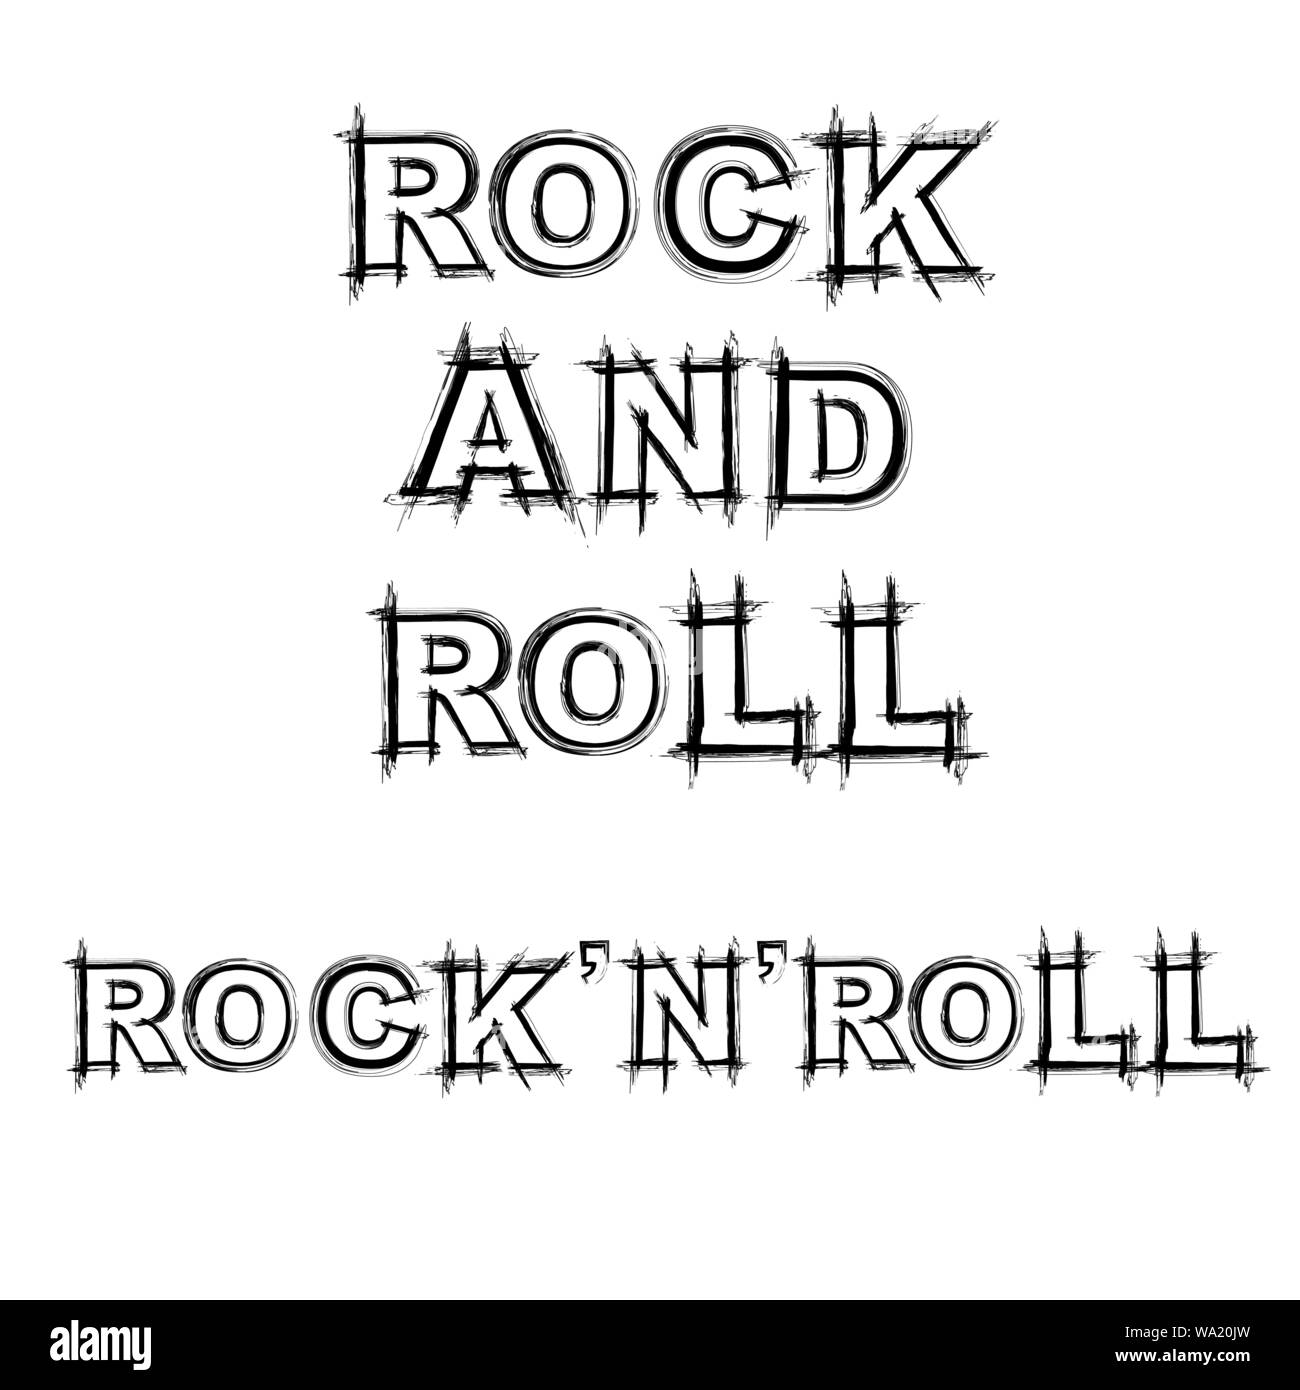 Black grunge rock and roll text isolated on white background Stock Vector